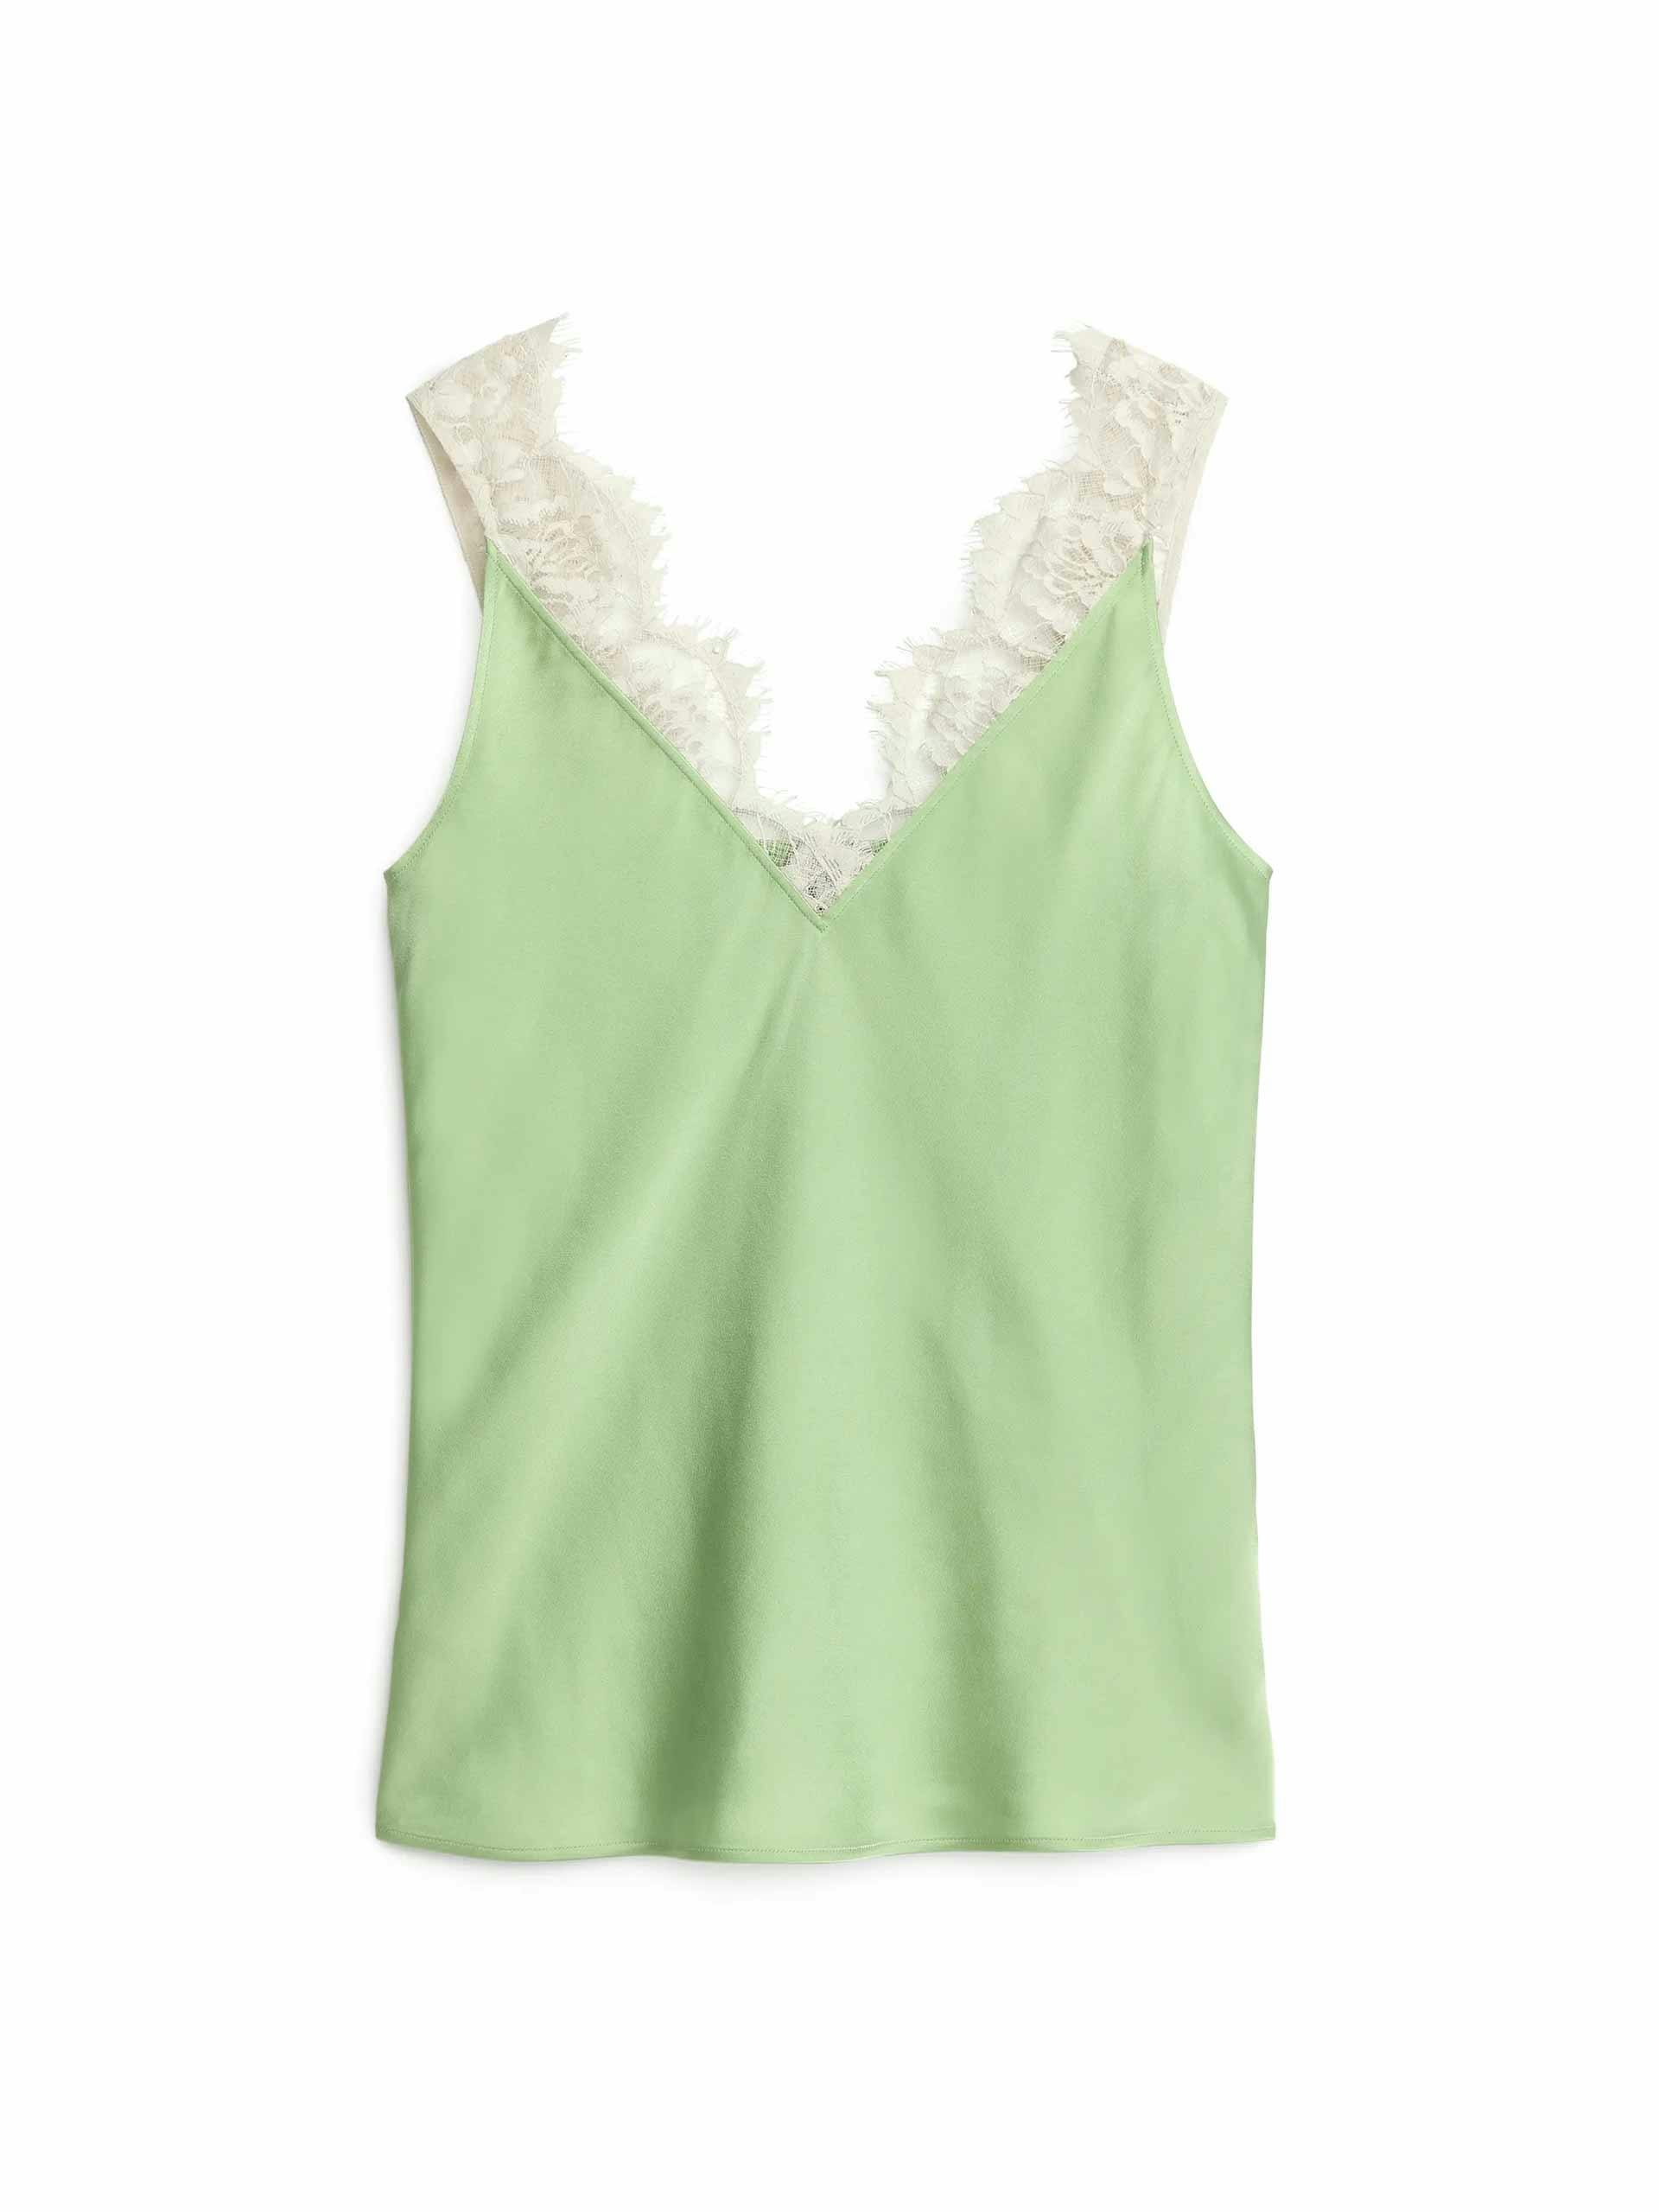 Green satin top with lace detail